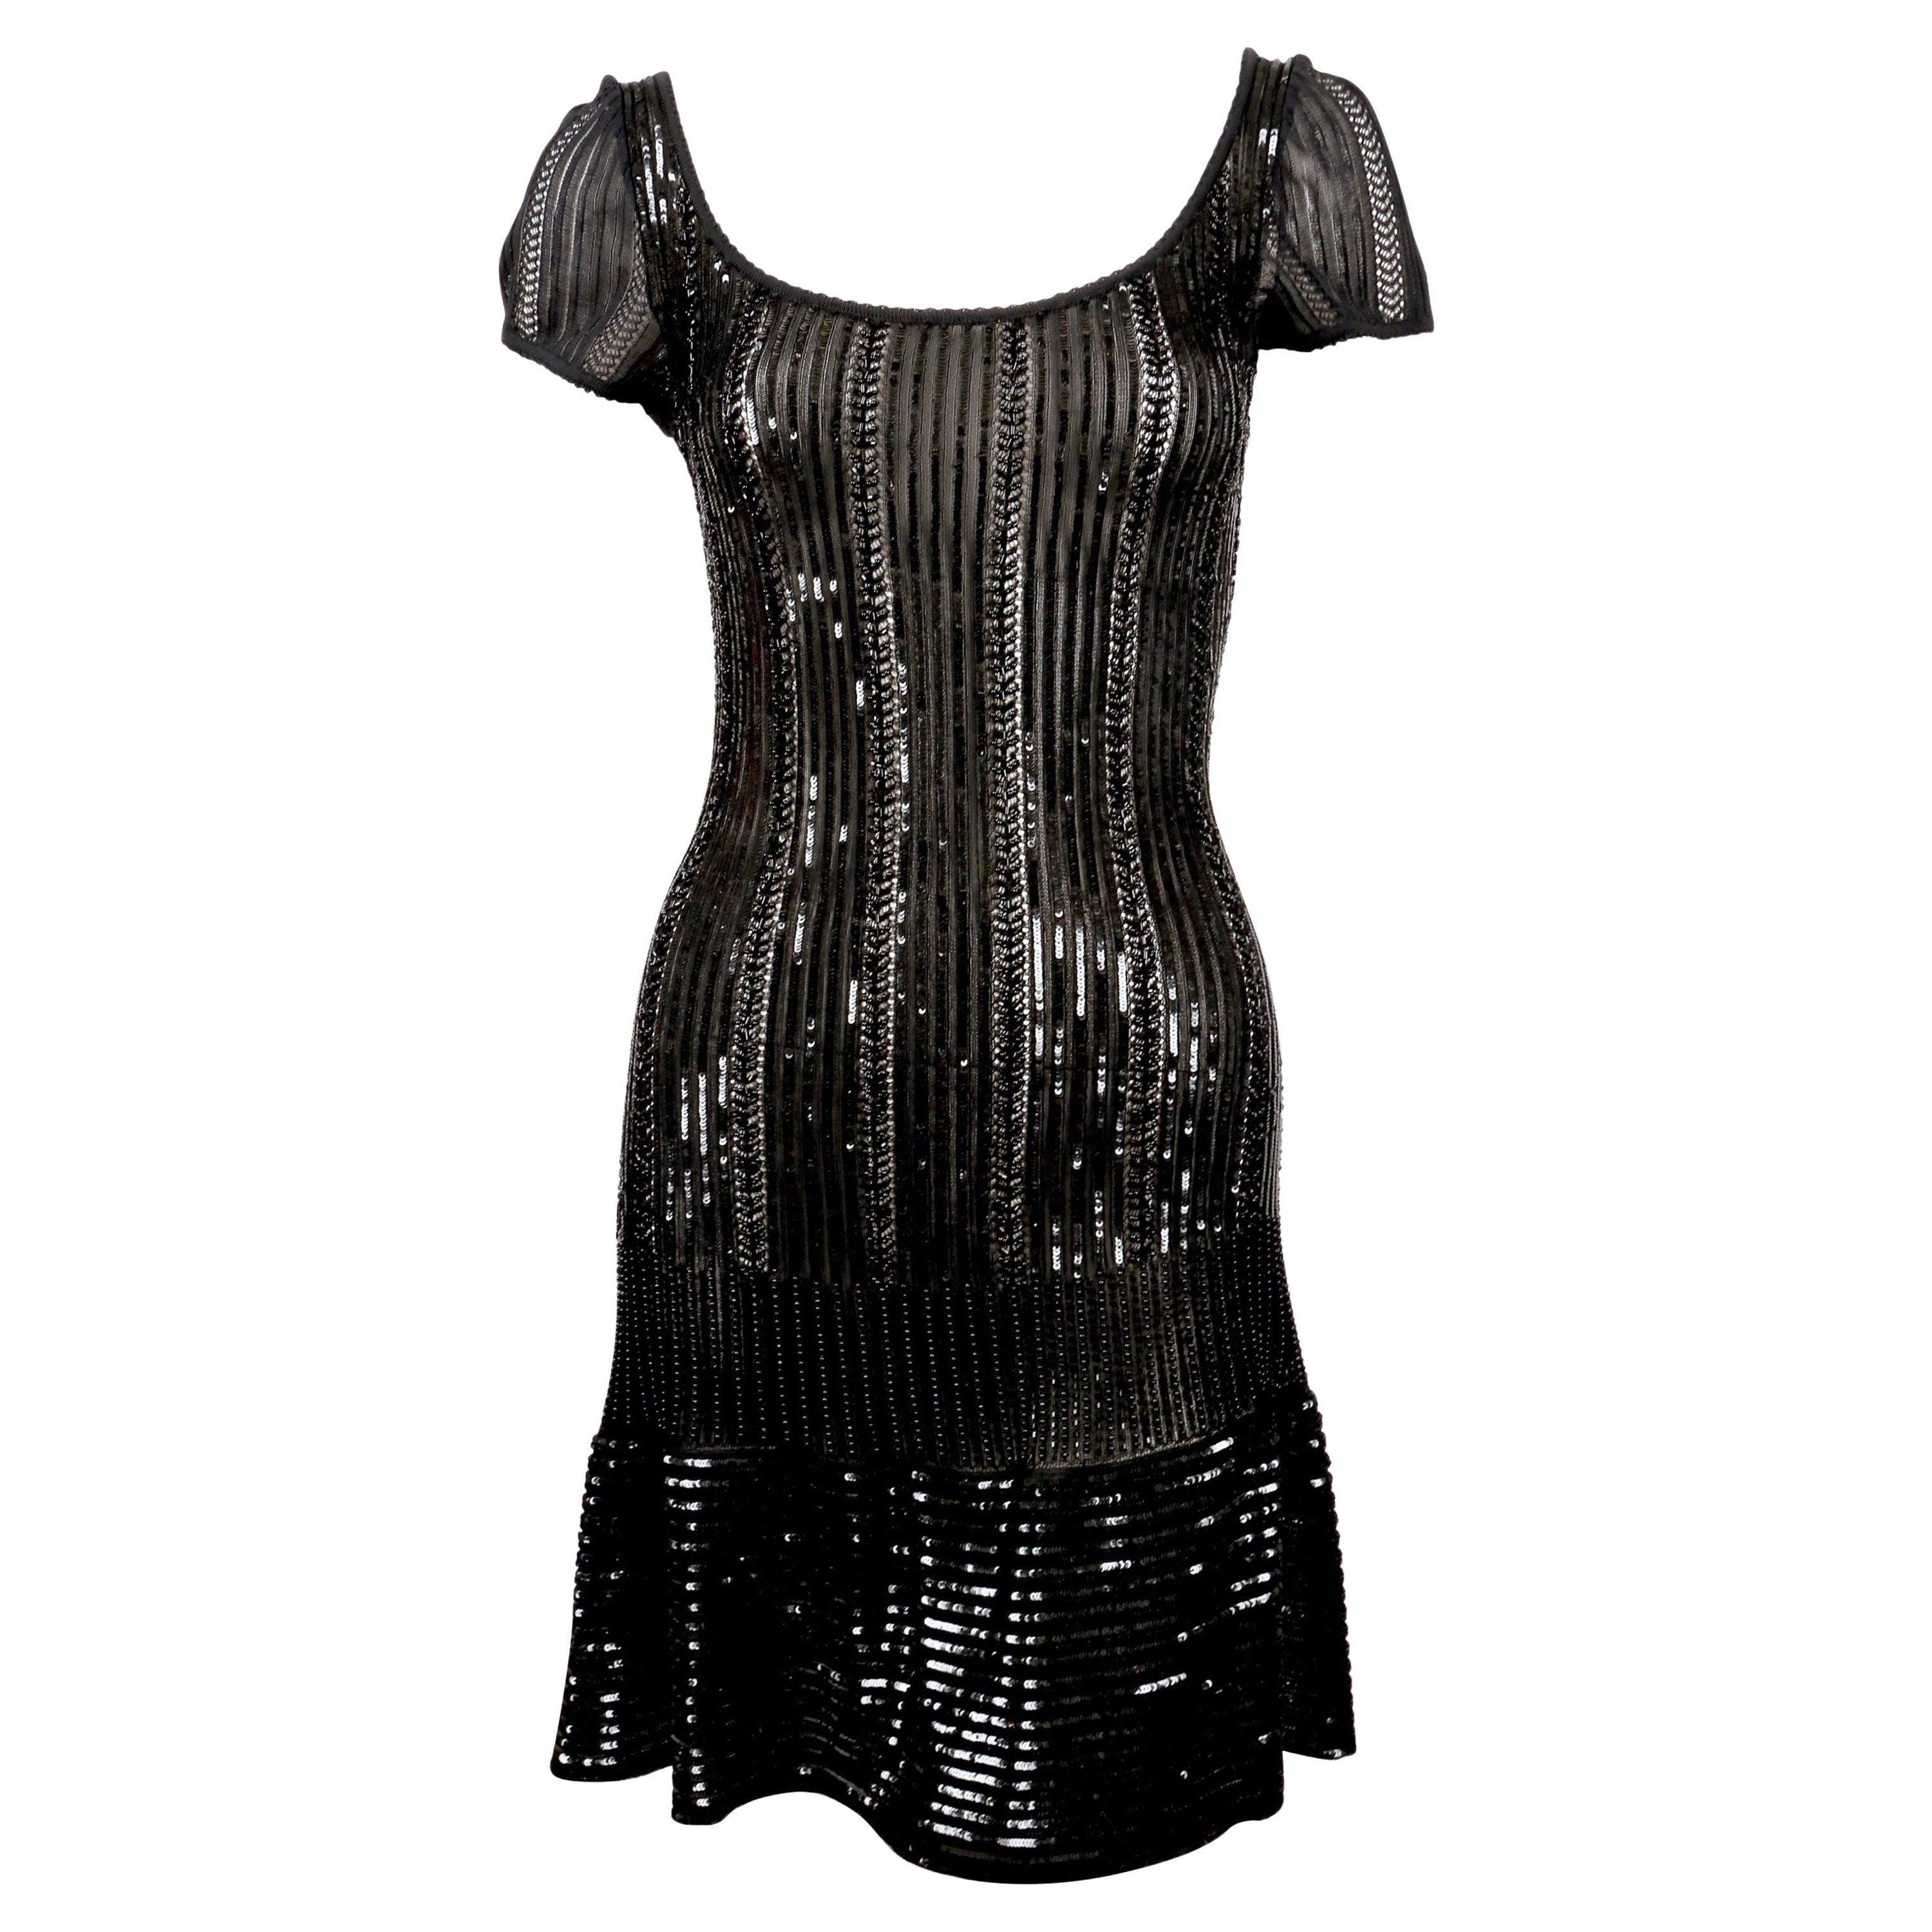 1996 AZZEDINE ALAIA black beaded and micro sequined dress For Sale